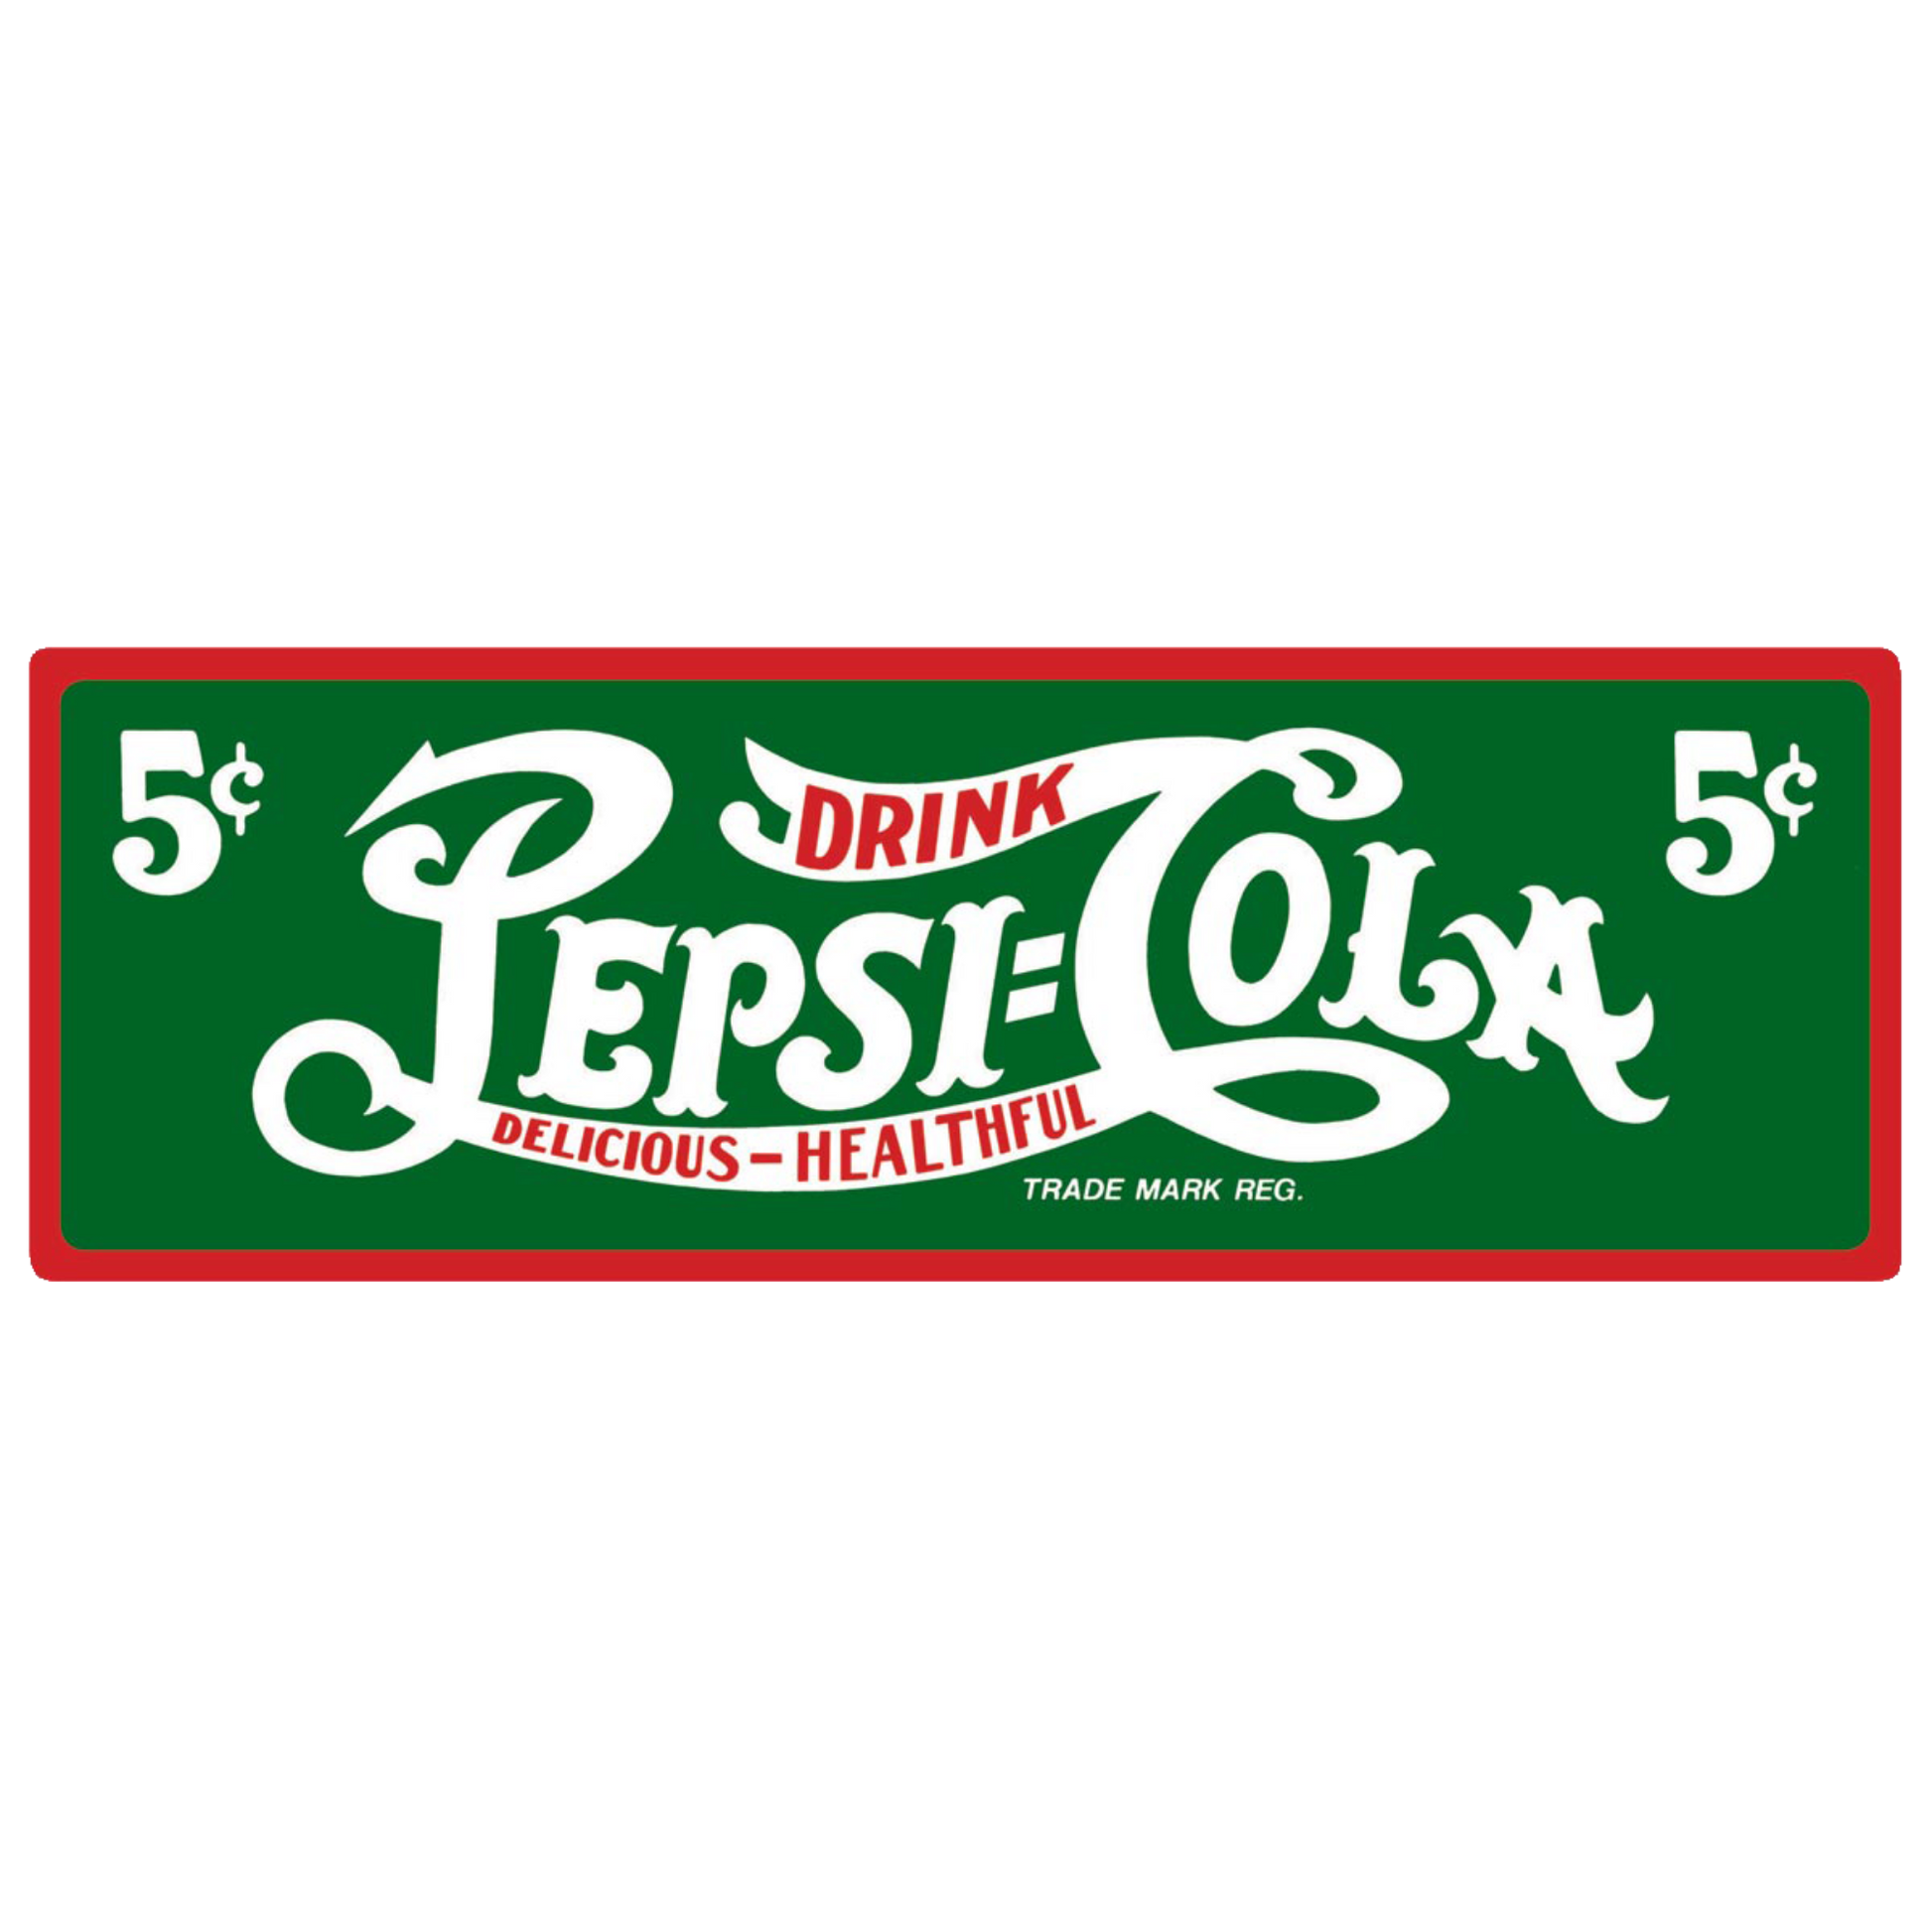 "Drink Pepsi-Cola - 5 cents" vintage-style tin sign with a green background and white lettering.